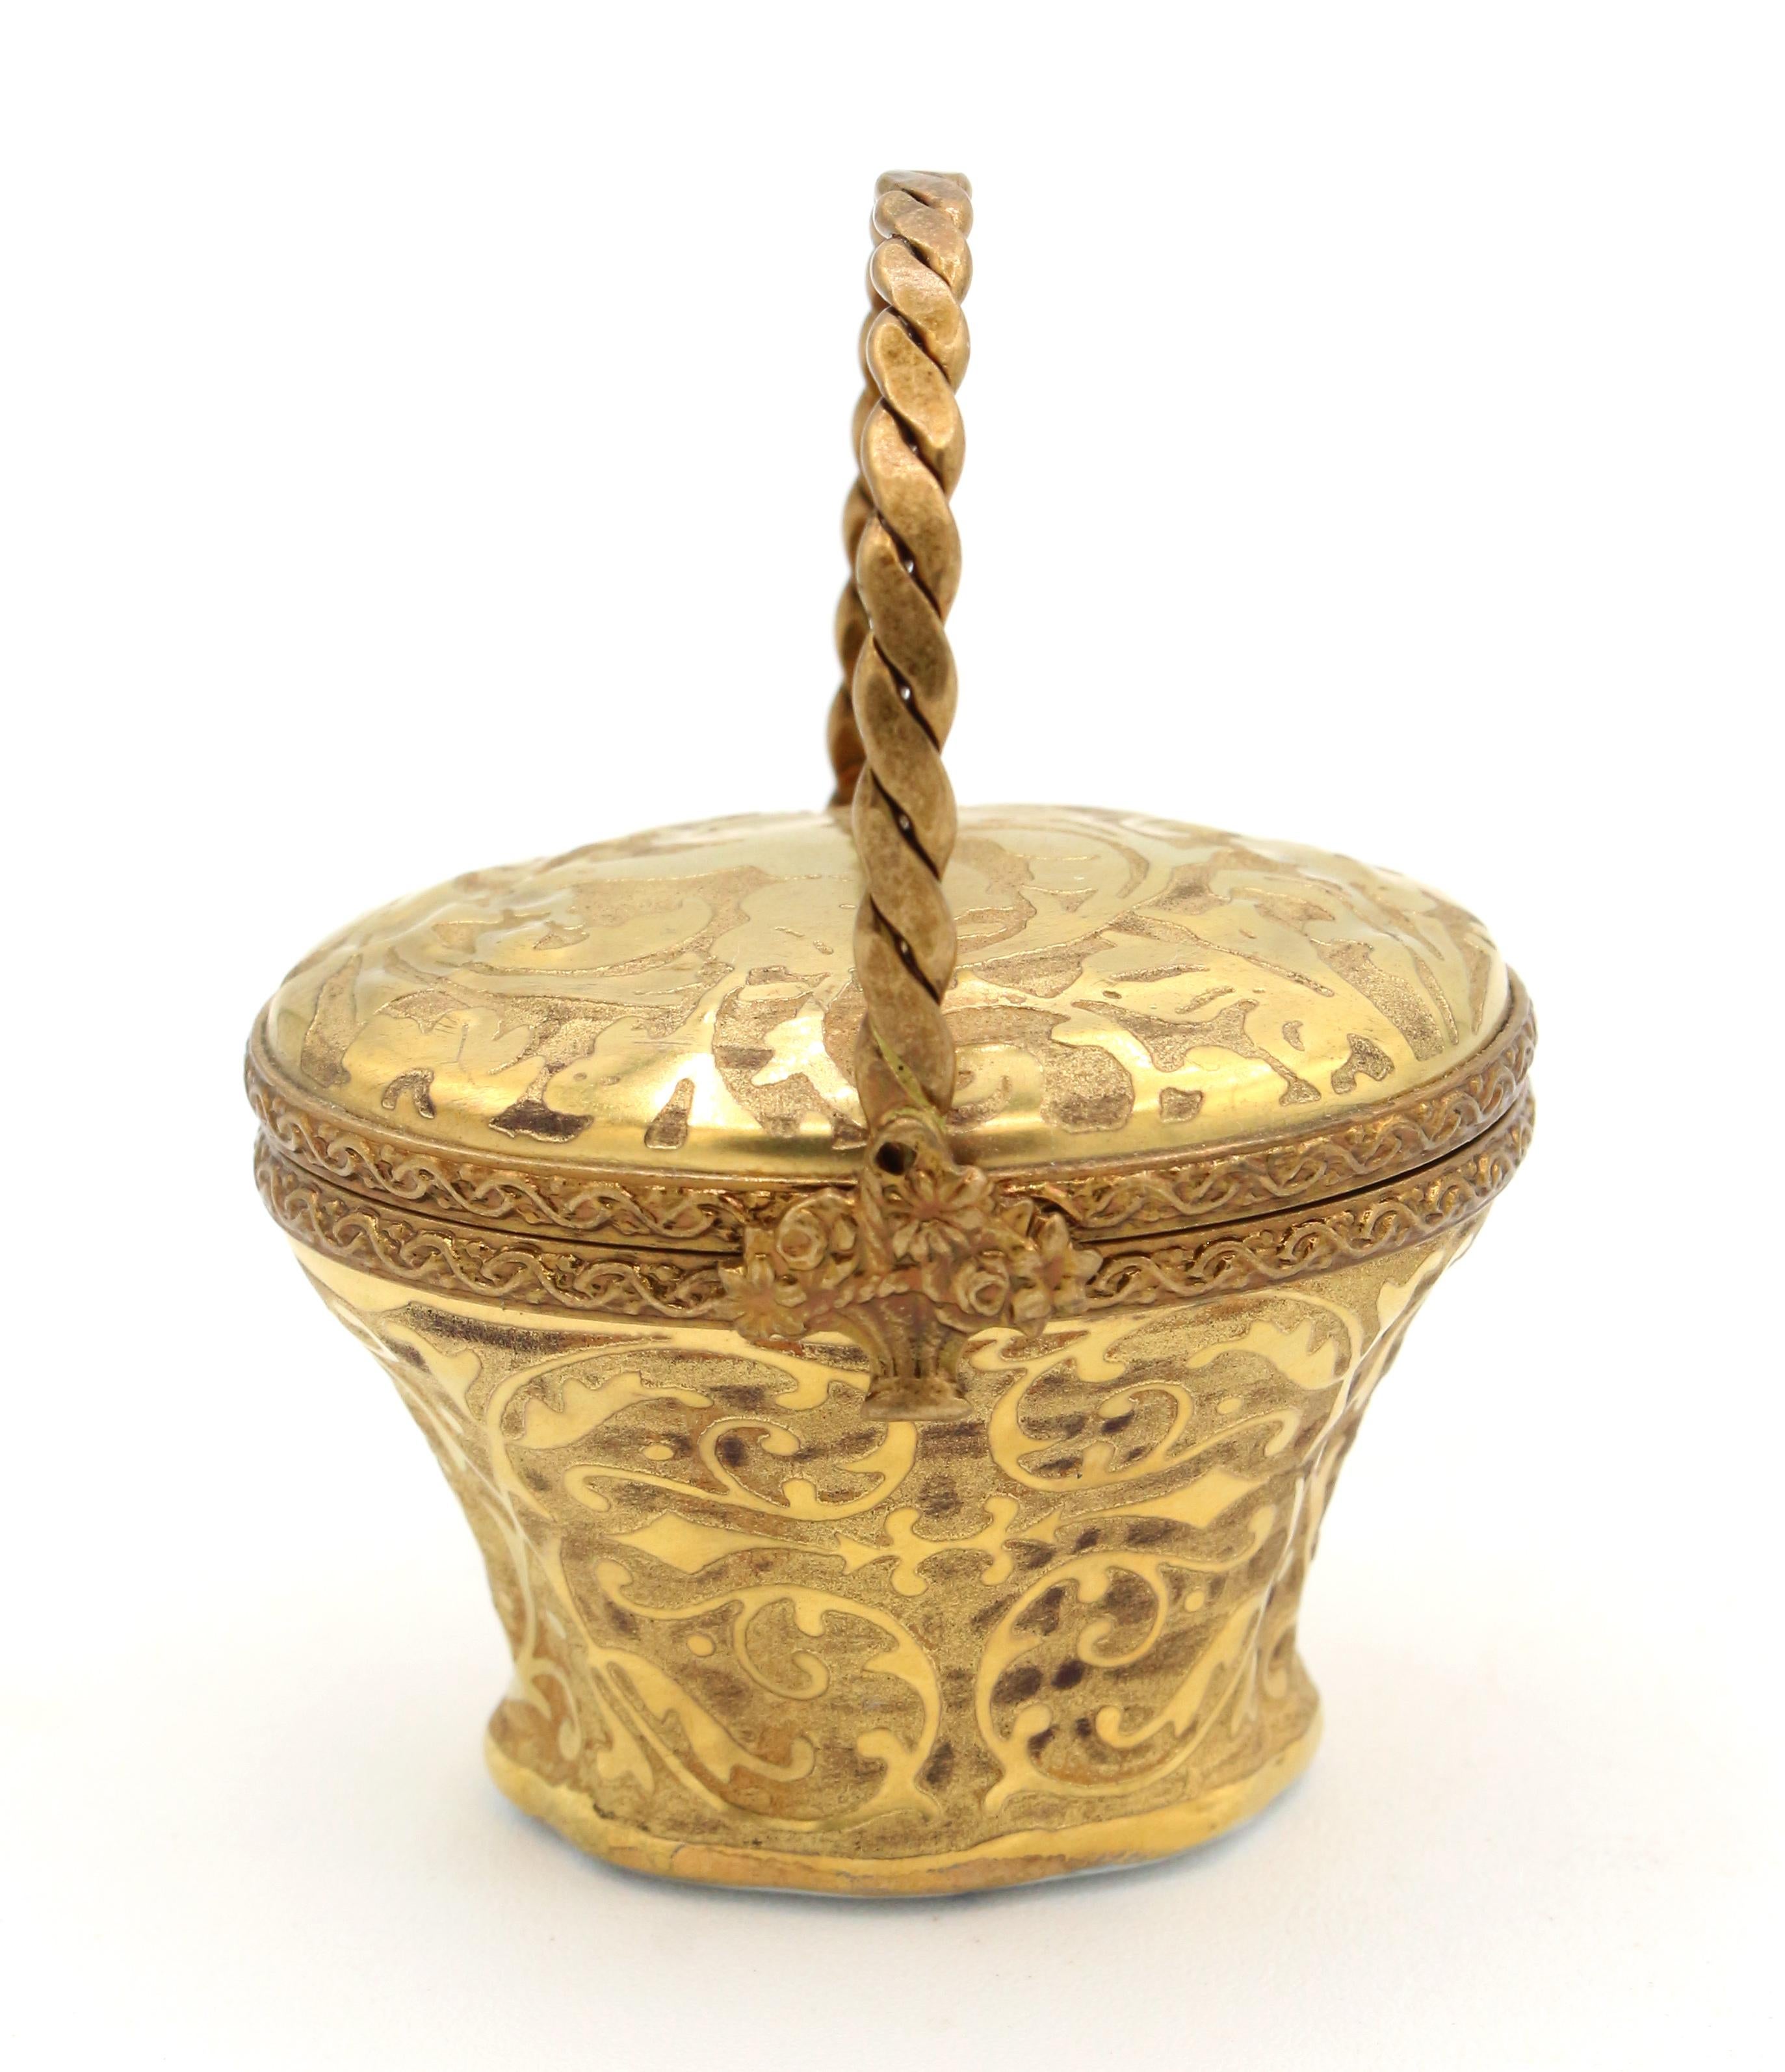 Limoges trinket or pill basket box, French, later 20th century. 24k gold encrusted porcelain. Marked: Limoges France, Peint main, Incrustation or fin (painted by hand, fine gold inlay), & artist's mark. Bas relief angel on top with scrolling leaves